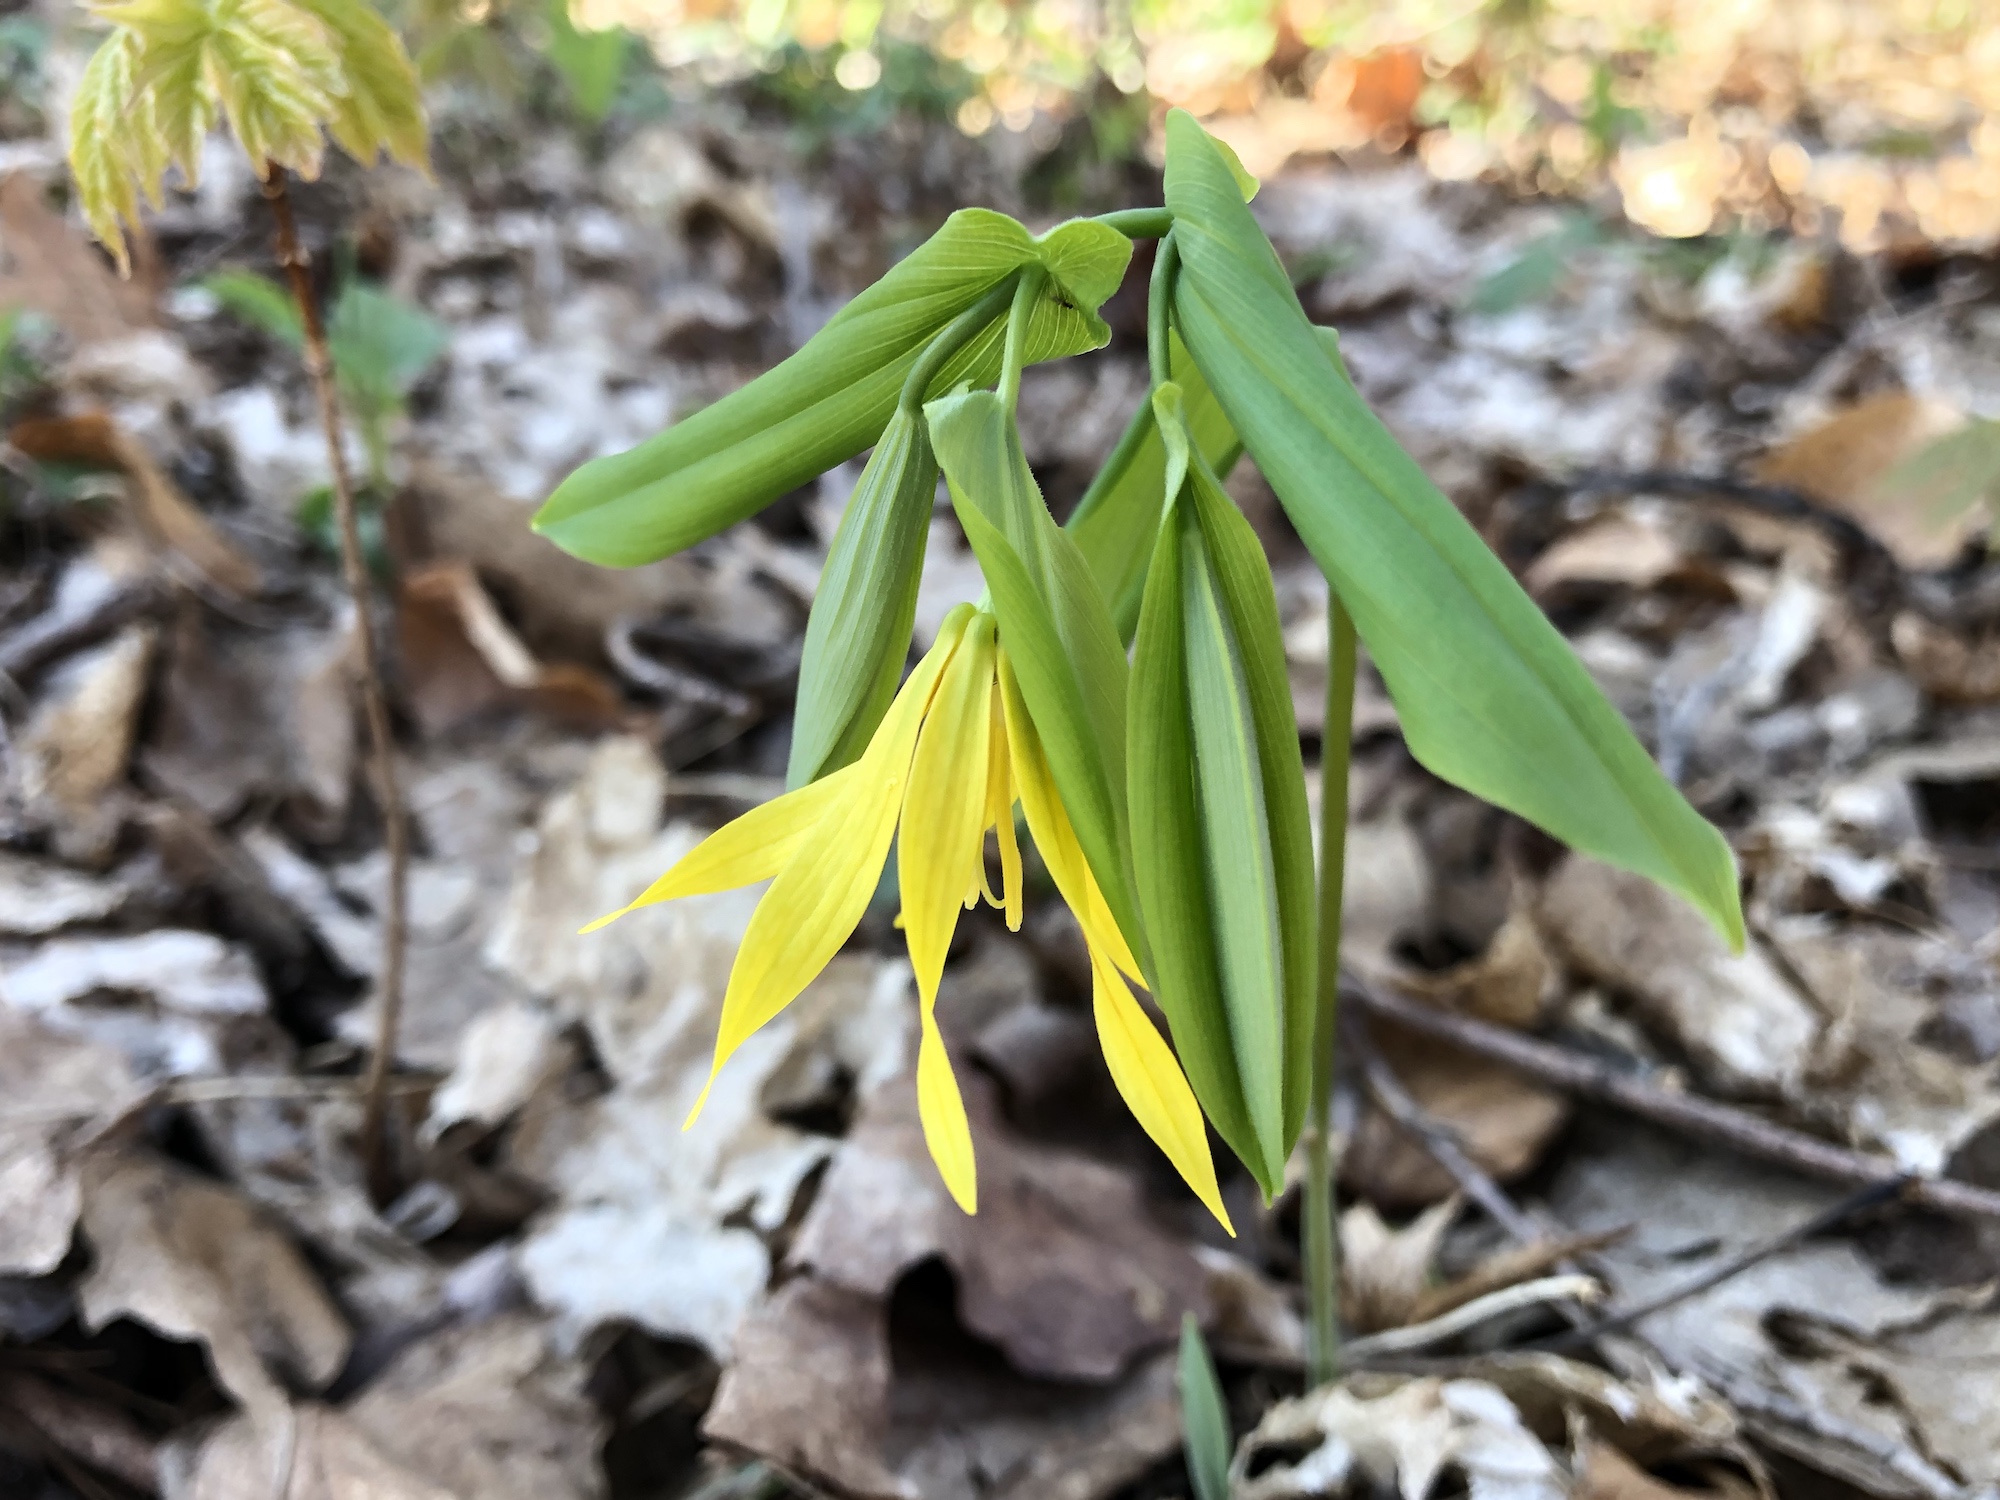 Bellwort in the Maple-Basswood Forest of the University of Wisconsin Arboretum in Madison, Wisconsin on April 30, 2020.